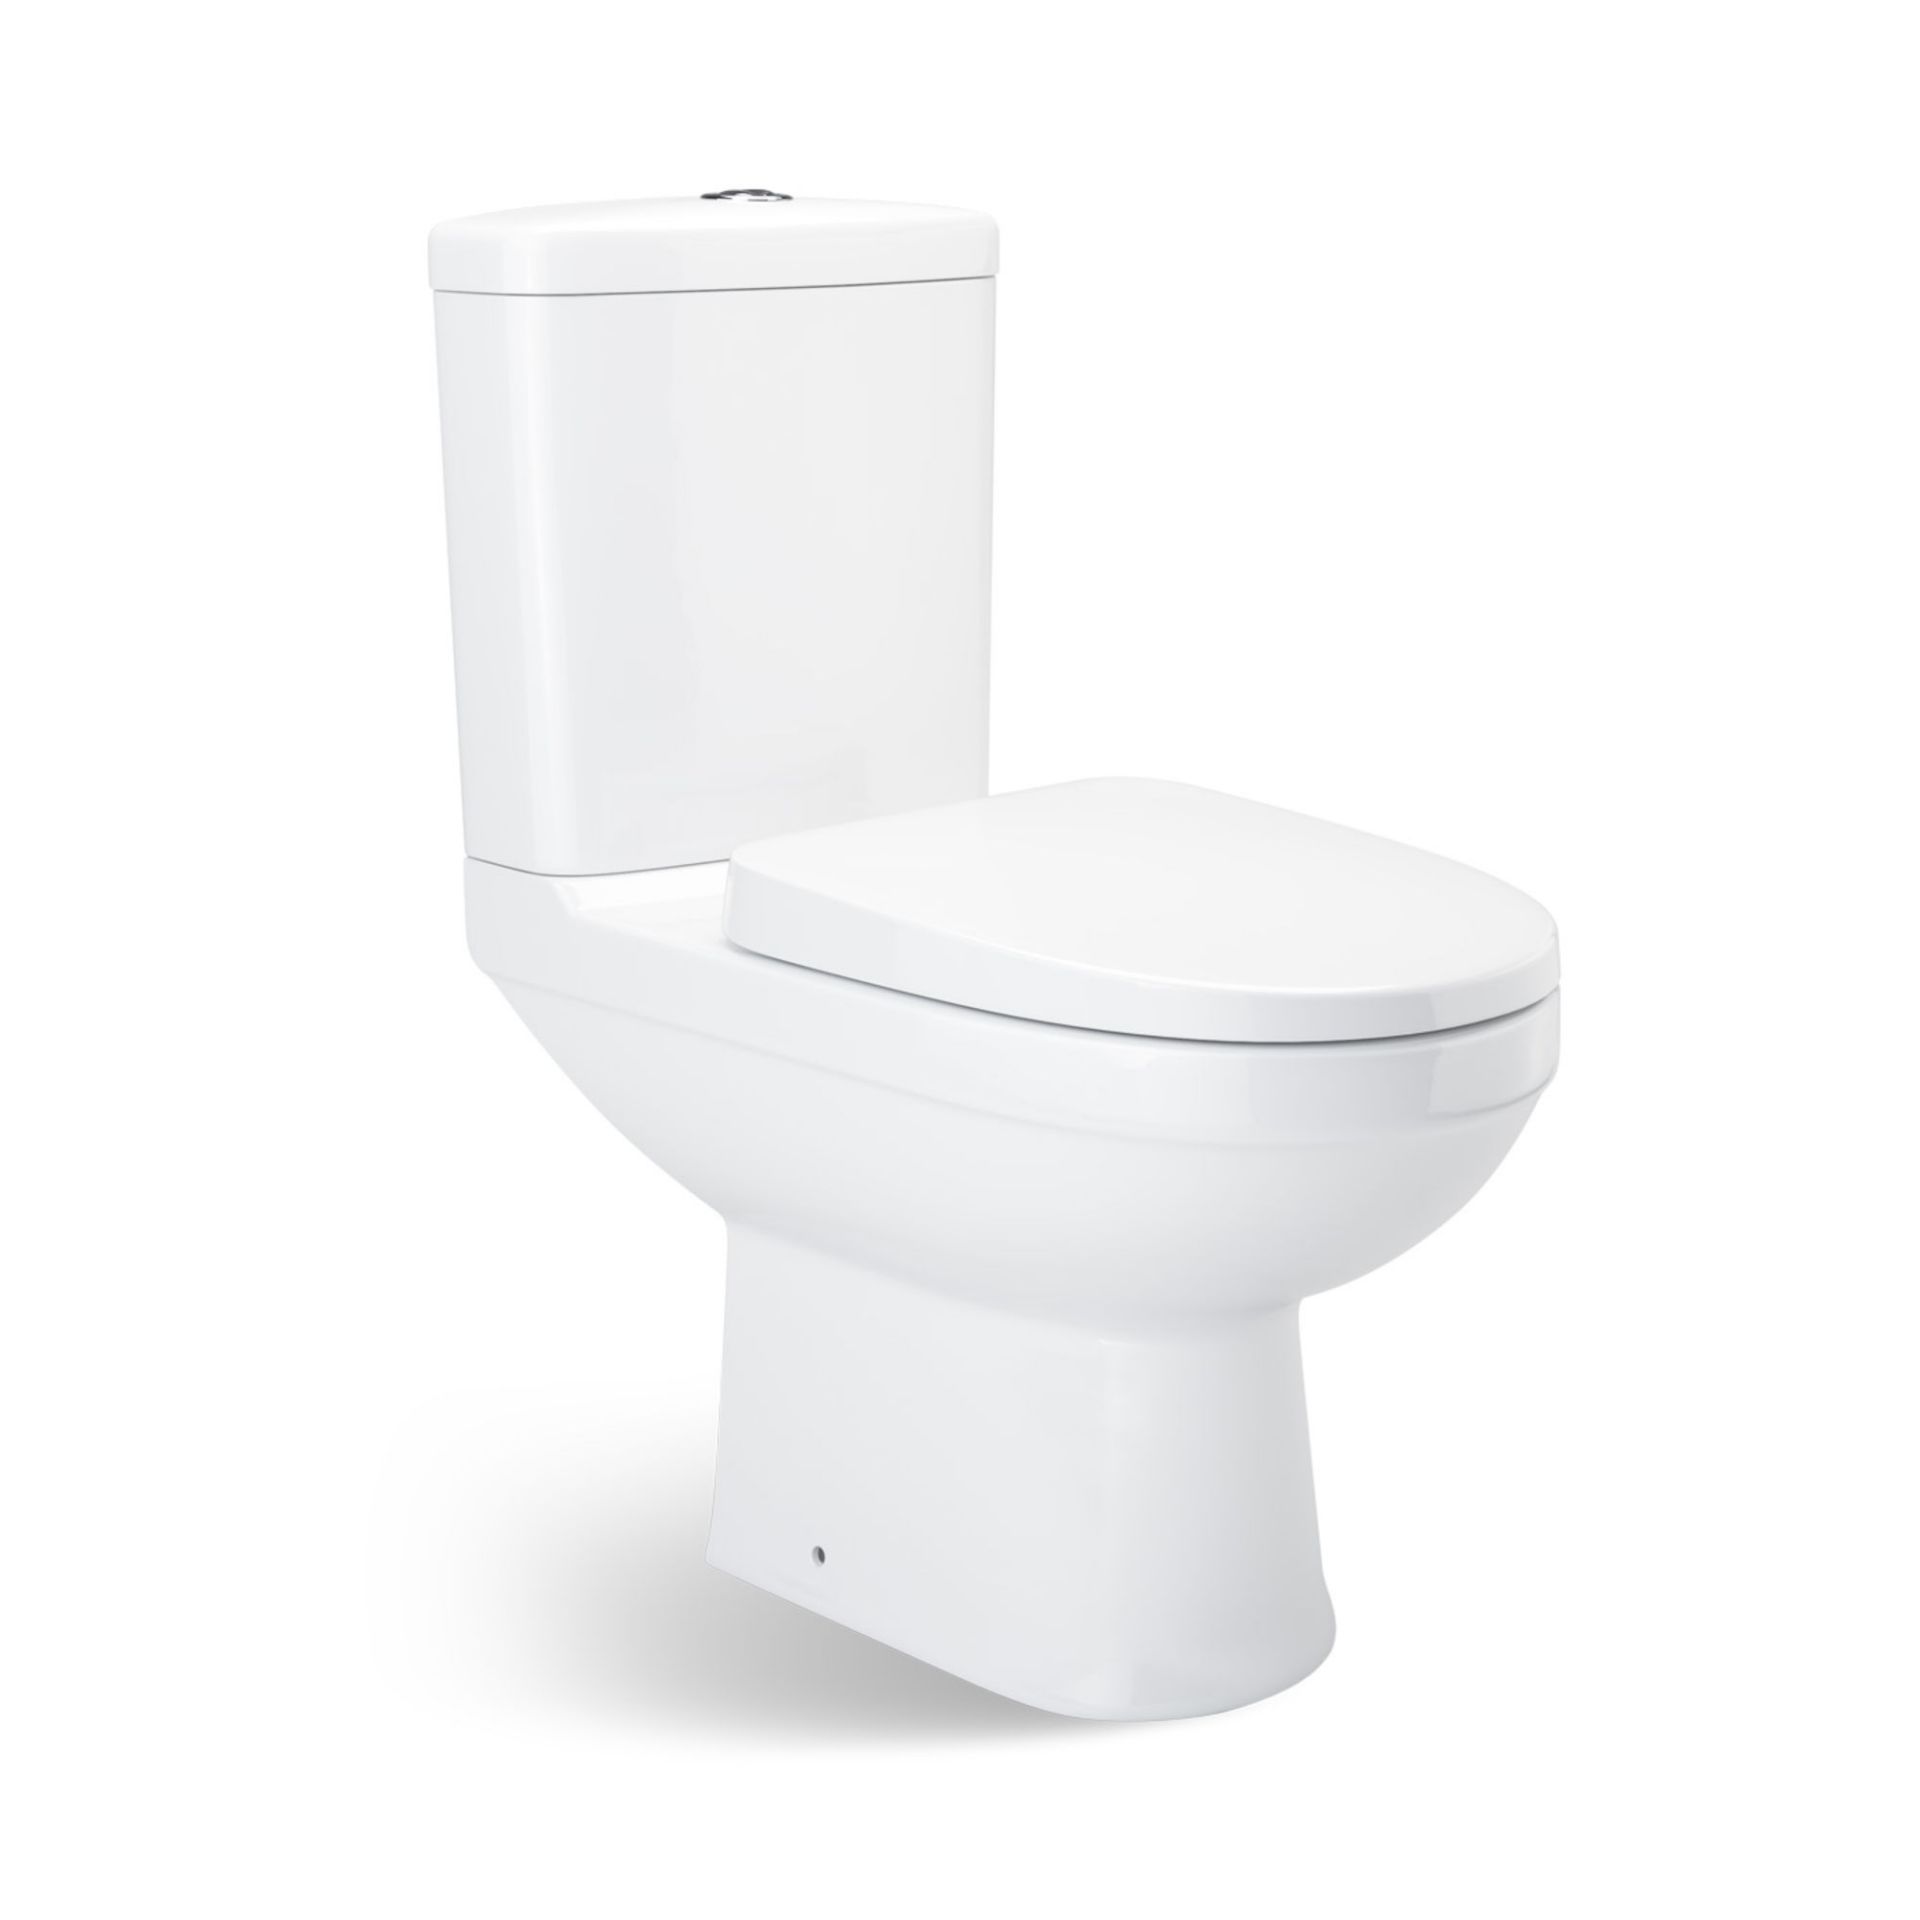 (MW31) Sabrosa II Close Coupled Toilet & Cistern inc Soft Close Seat. Made from White Vitreous China - Image 2 of 4